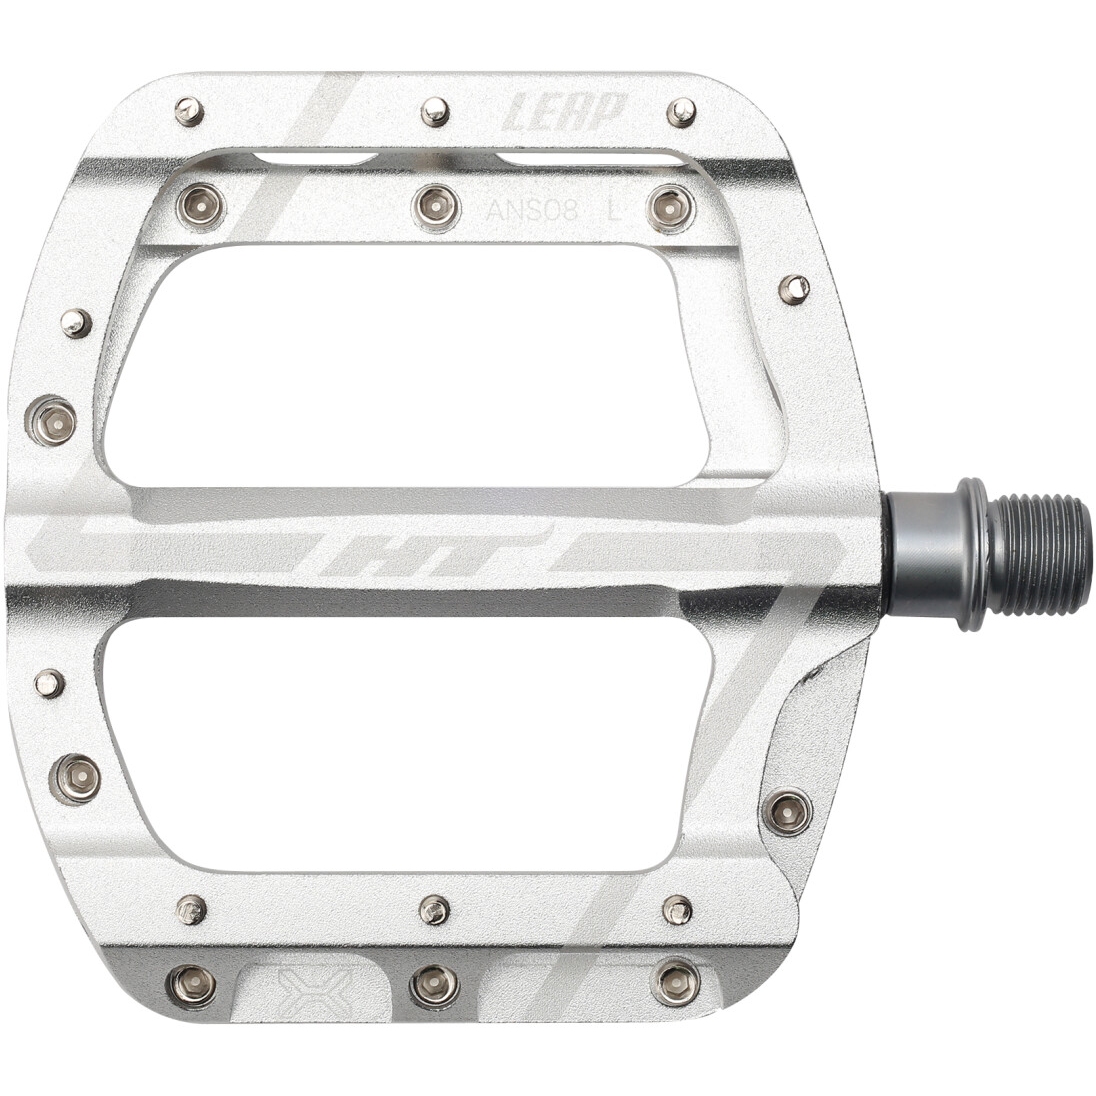 Picture of HT ANS08 Leap Flat Pedal - silver